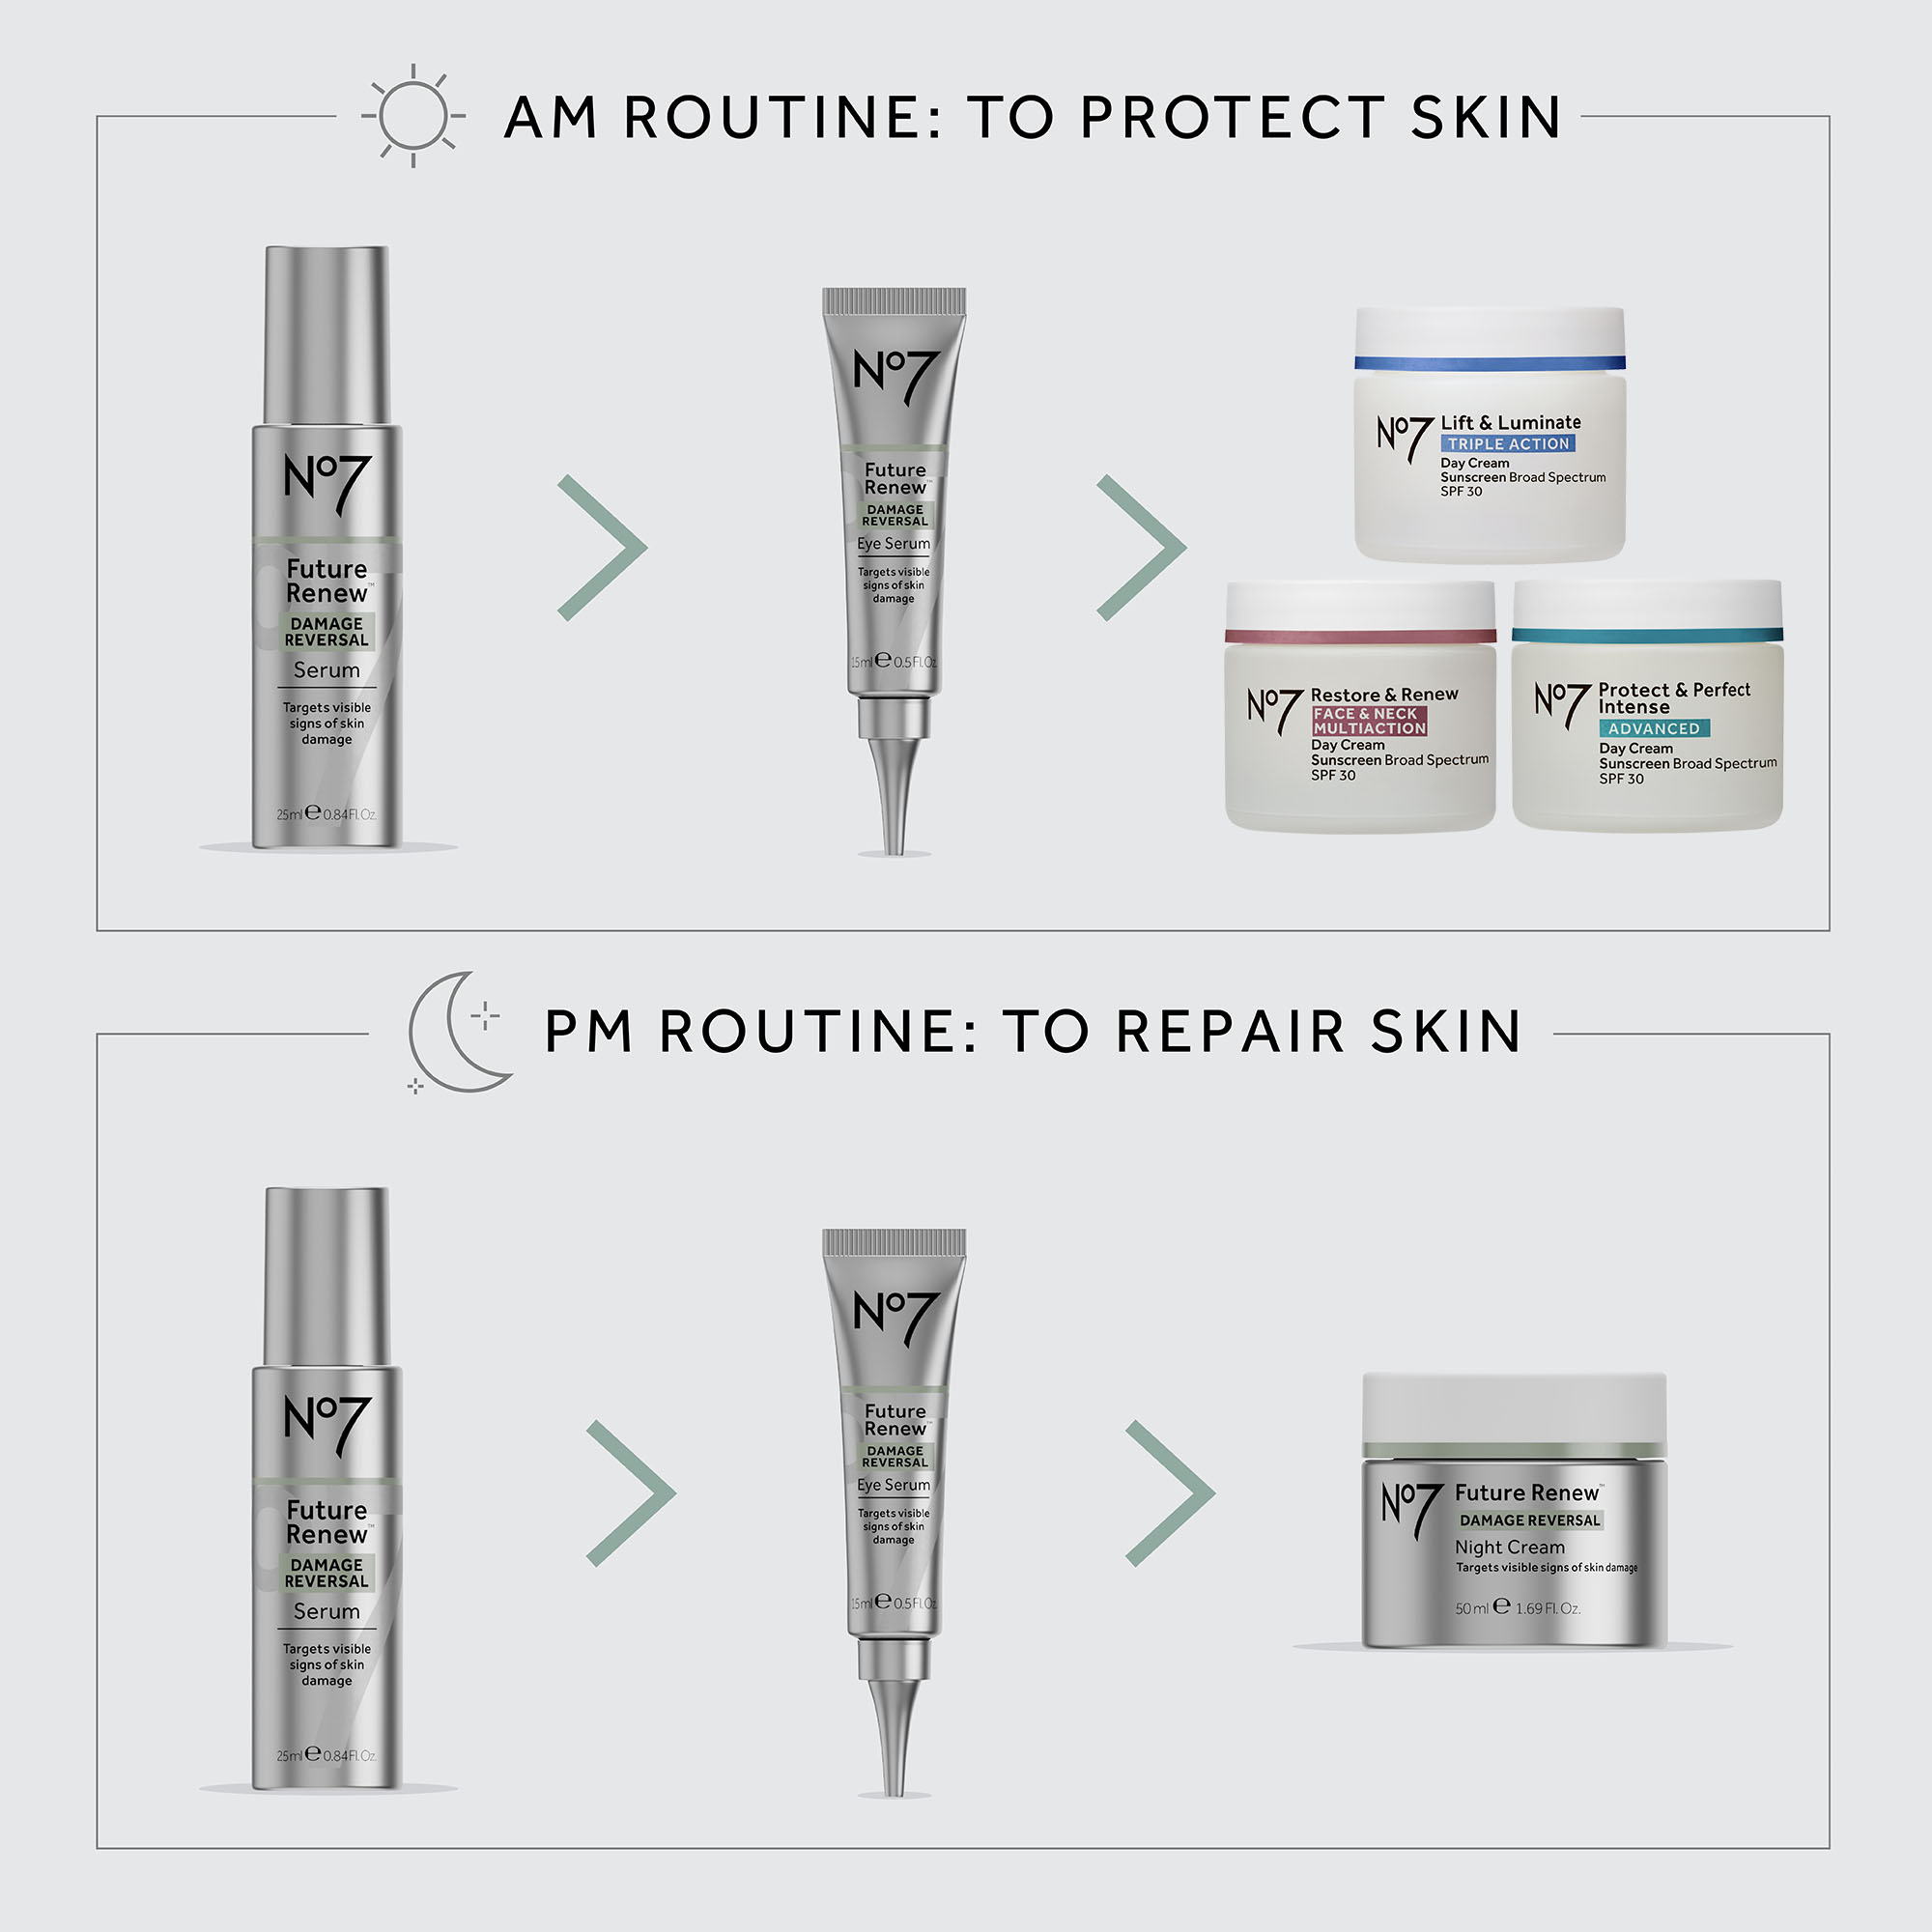 am routine to protect skin. Pm routine to repair skin.